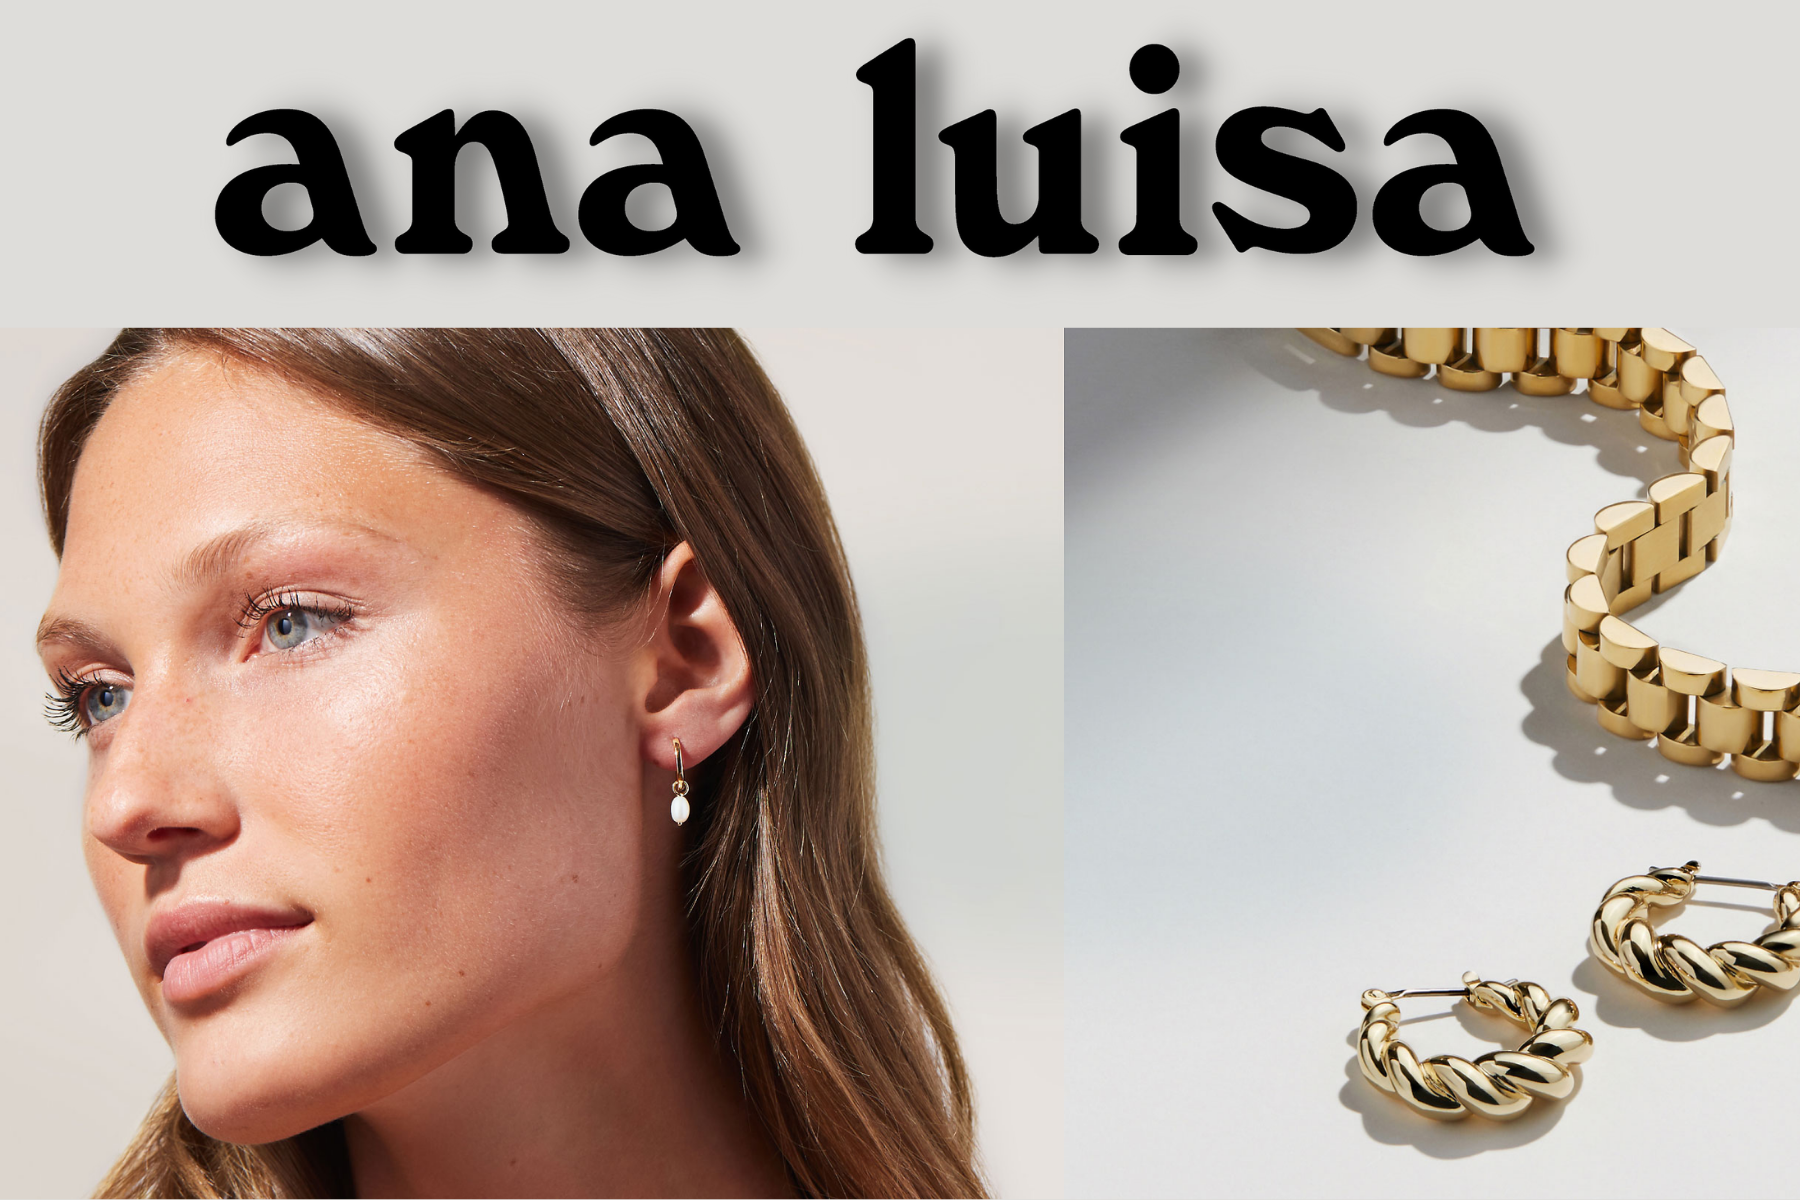 A model on the left wearing Ana Luisa's white earring and a pair of twisted golden earring and a gold bracelet on the right